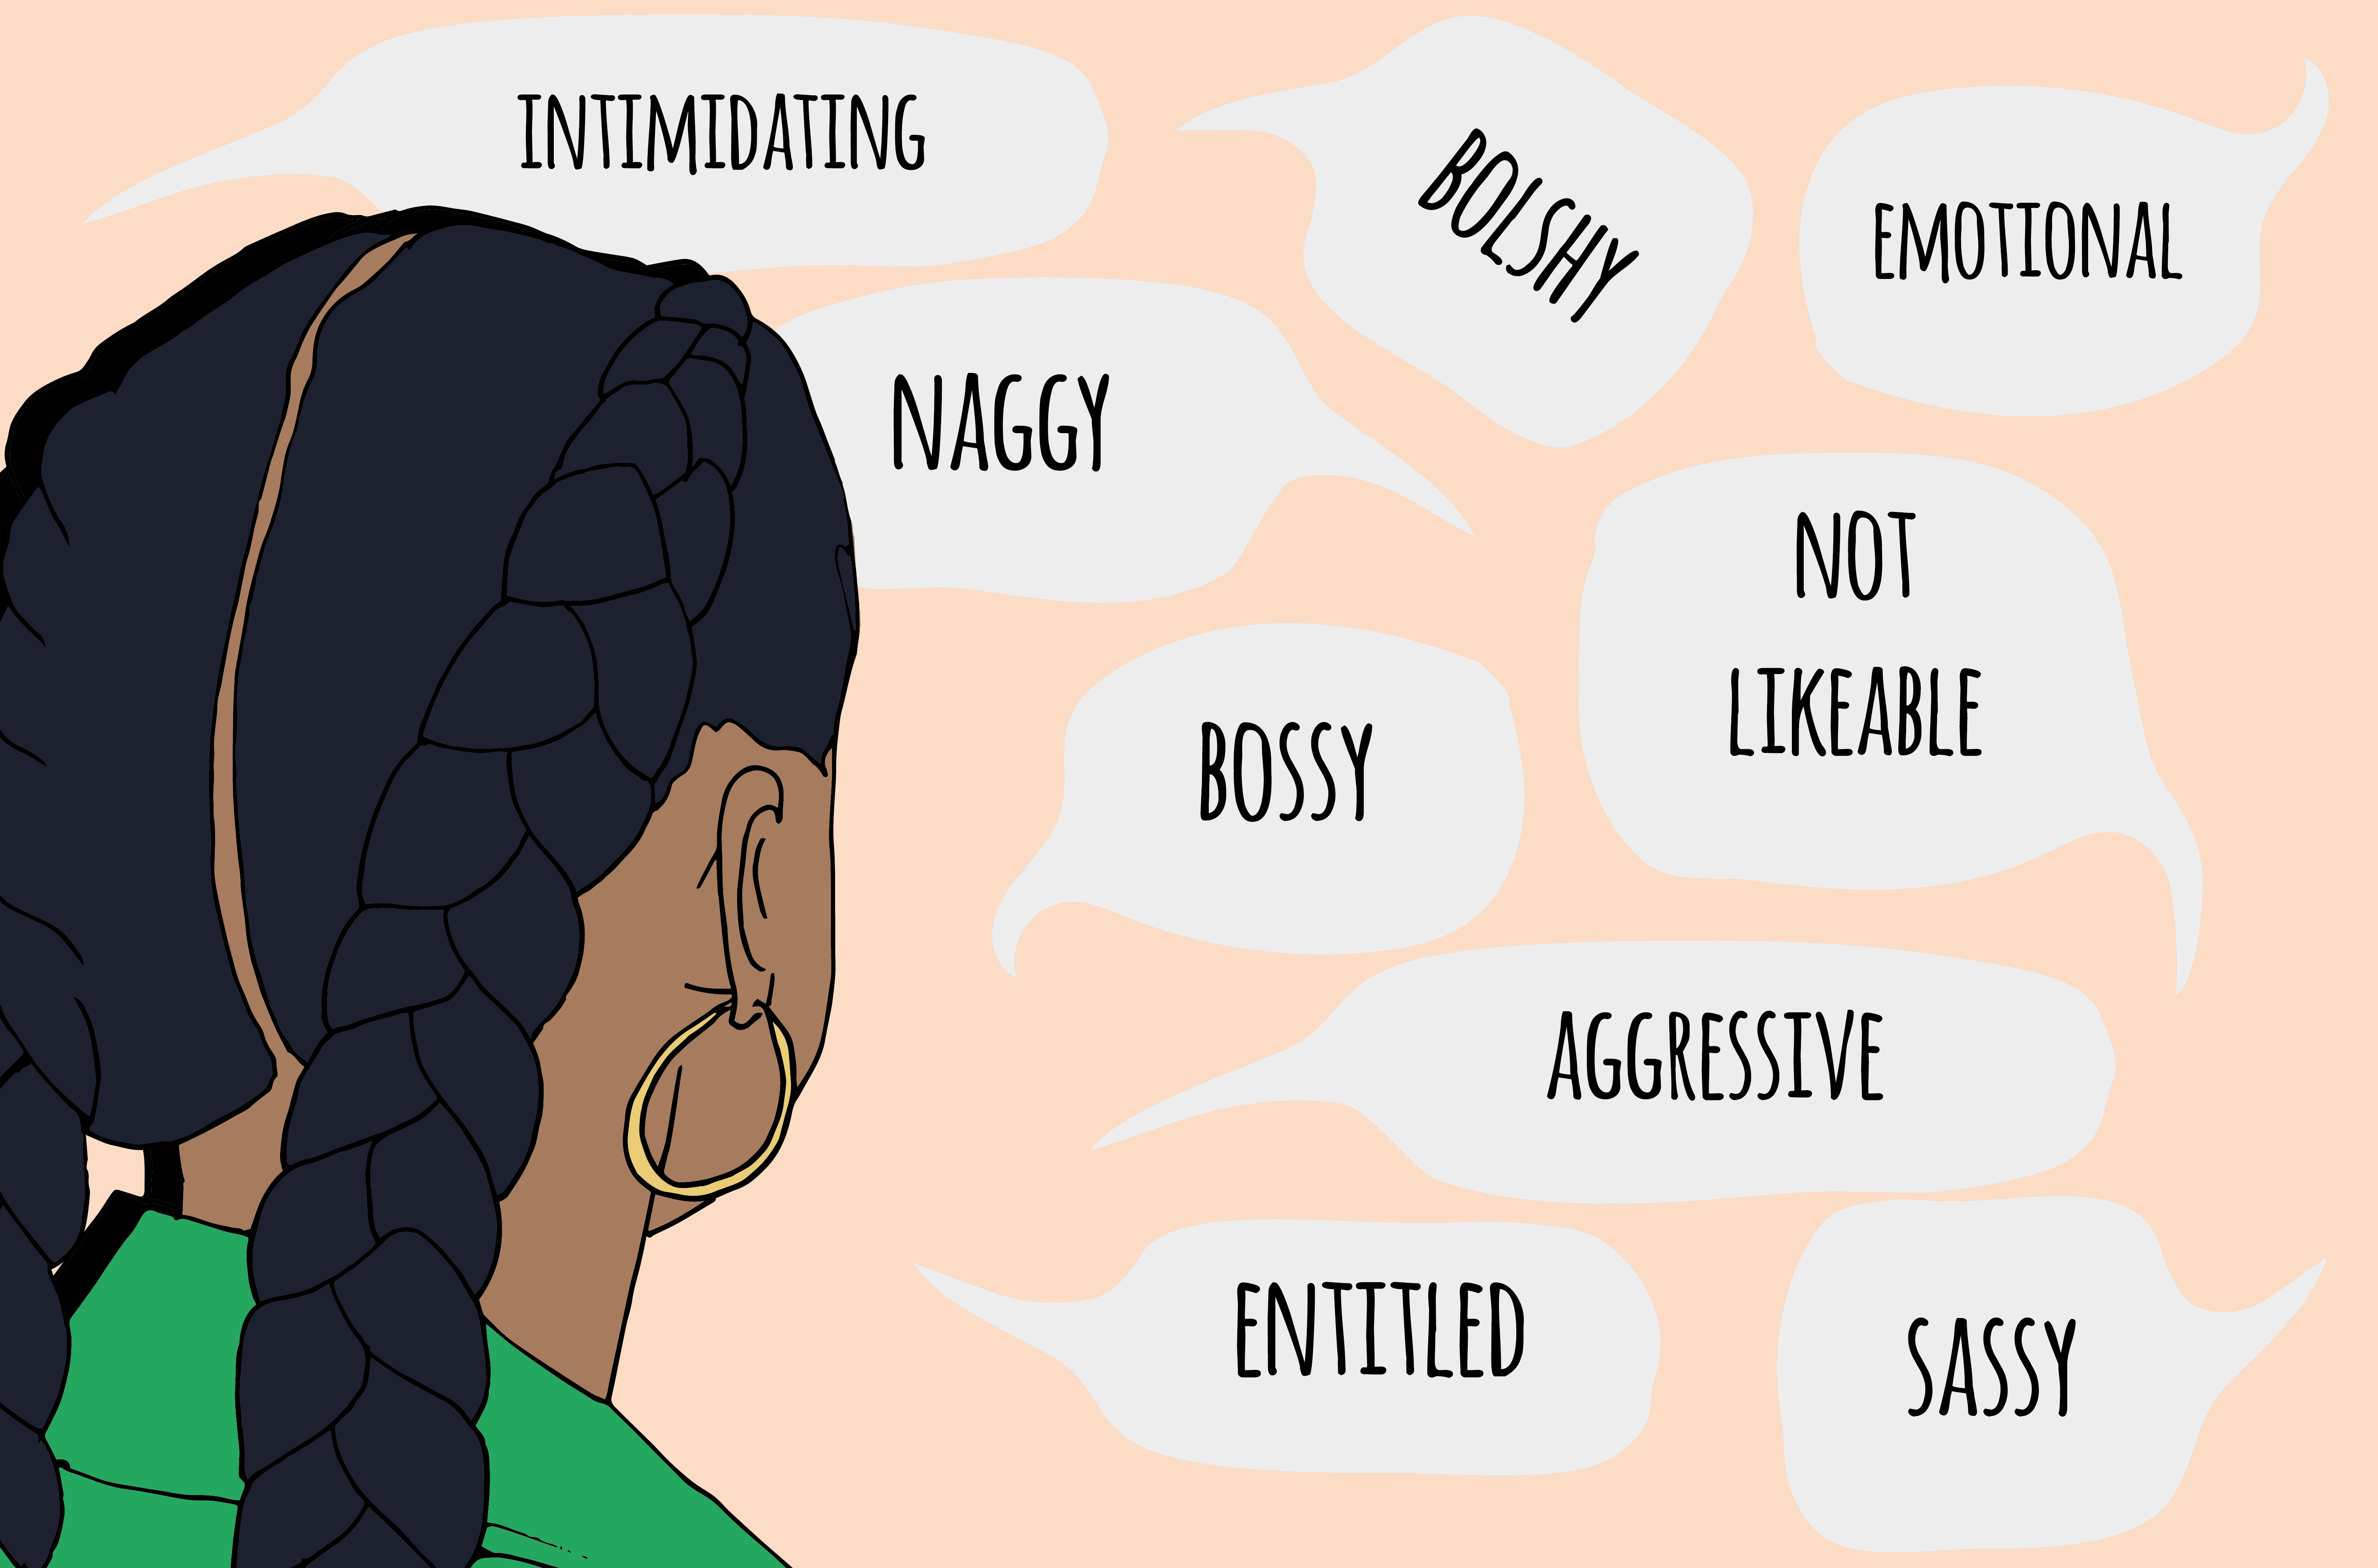 Bolshy, sassy, intimidating: words used to deny WOC their voice in the workplace